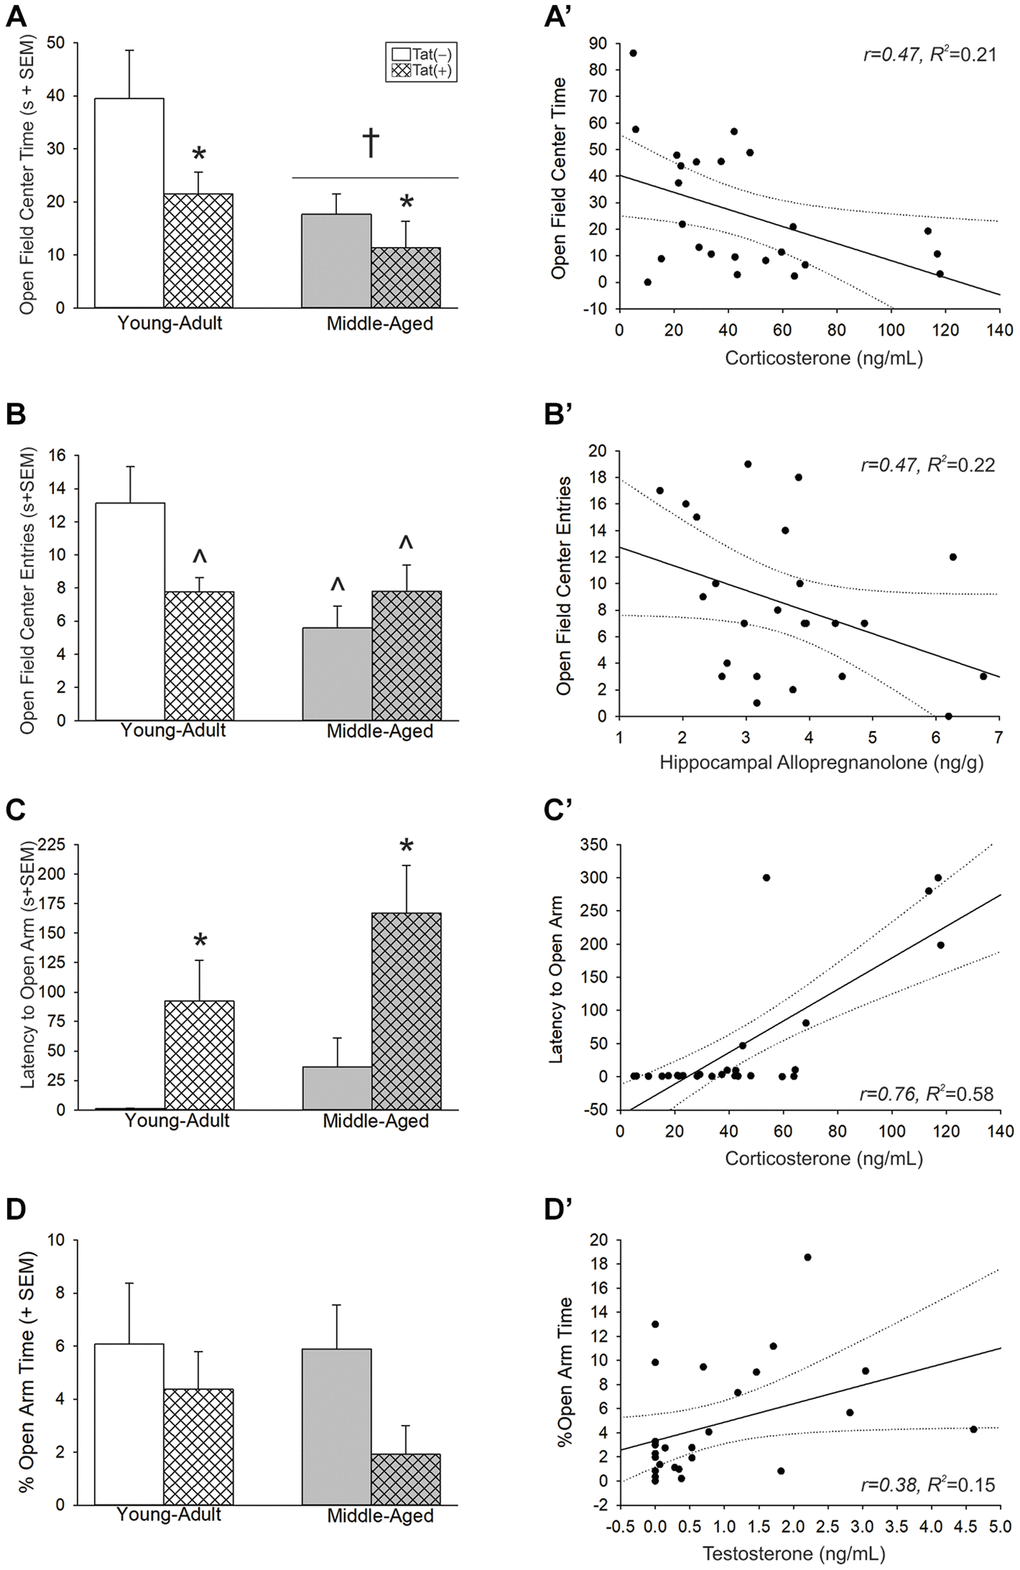 (A–D) Anxiety-like behavior in the open field and elevated plus-maze and (A’–D’) simple linear regressions between circulating and central steroid hormones among young adult and middle-aged HIV-1 Tat-transgenic male mice [Tat(+)] or their non-Tat-expressing age-matched counterparts [Tat(−)]. (A) Time (s) spent in the brightly-lit center of an open field. (B) Numbers of entries made into the center of an open field. (C) Latency (s) to enter the open arms of an elevated plus-maze. (D) The proportional time spent in the open arms of an elevated plus-maze. Regressions between (A’) circulating corticosterone and center time, (B’) hippocampal allopregnanolone and center entries, (C’) circulating corticosterone and latency to enter open arms, and (D’) circulating T and proportional open arm time. *main effect for Tat genotype wherein Tat(+) mice to differ from Tat(−) mice. †main effect for middle-aged mice to differ from young adult mice. ^significant interaction wherein indicated group differs from young adult Tat(−) controls. Regression lines (solid) are depicted with 95% confidence intervals (dotted), (two-way ANOVA, p 